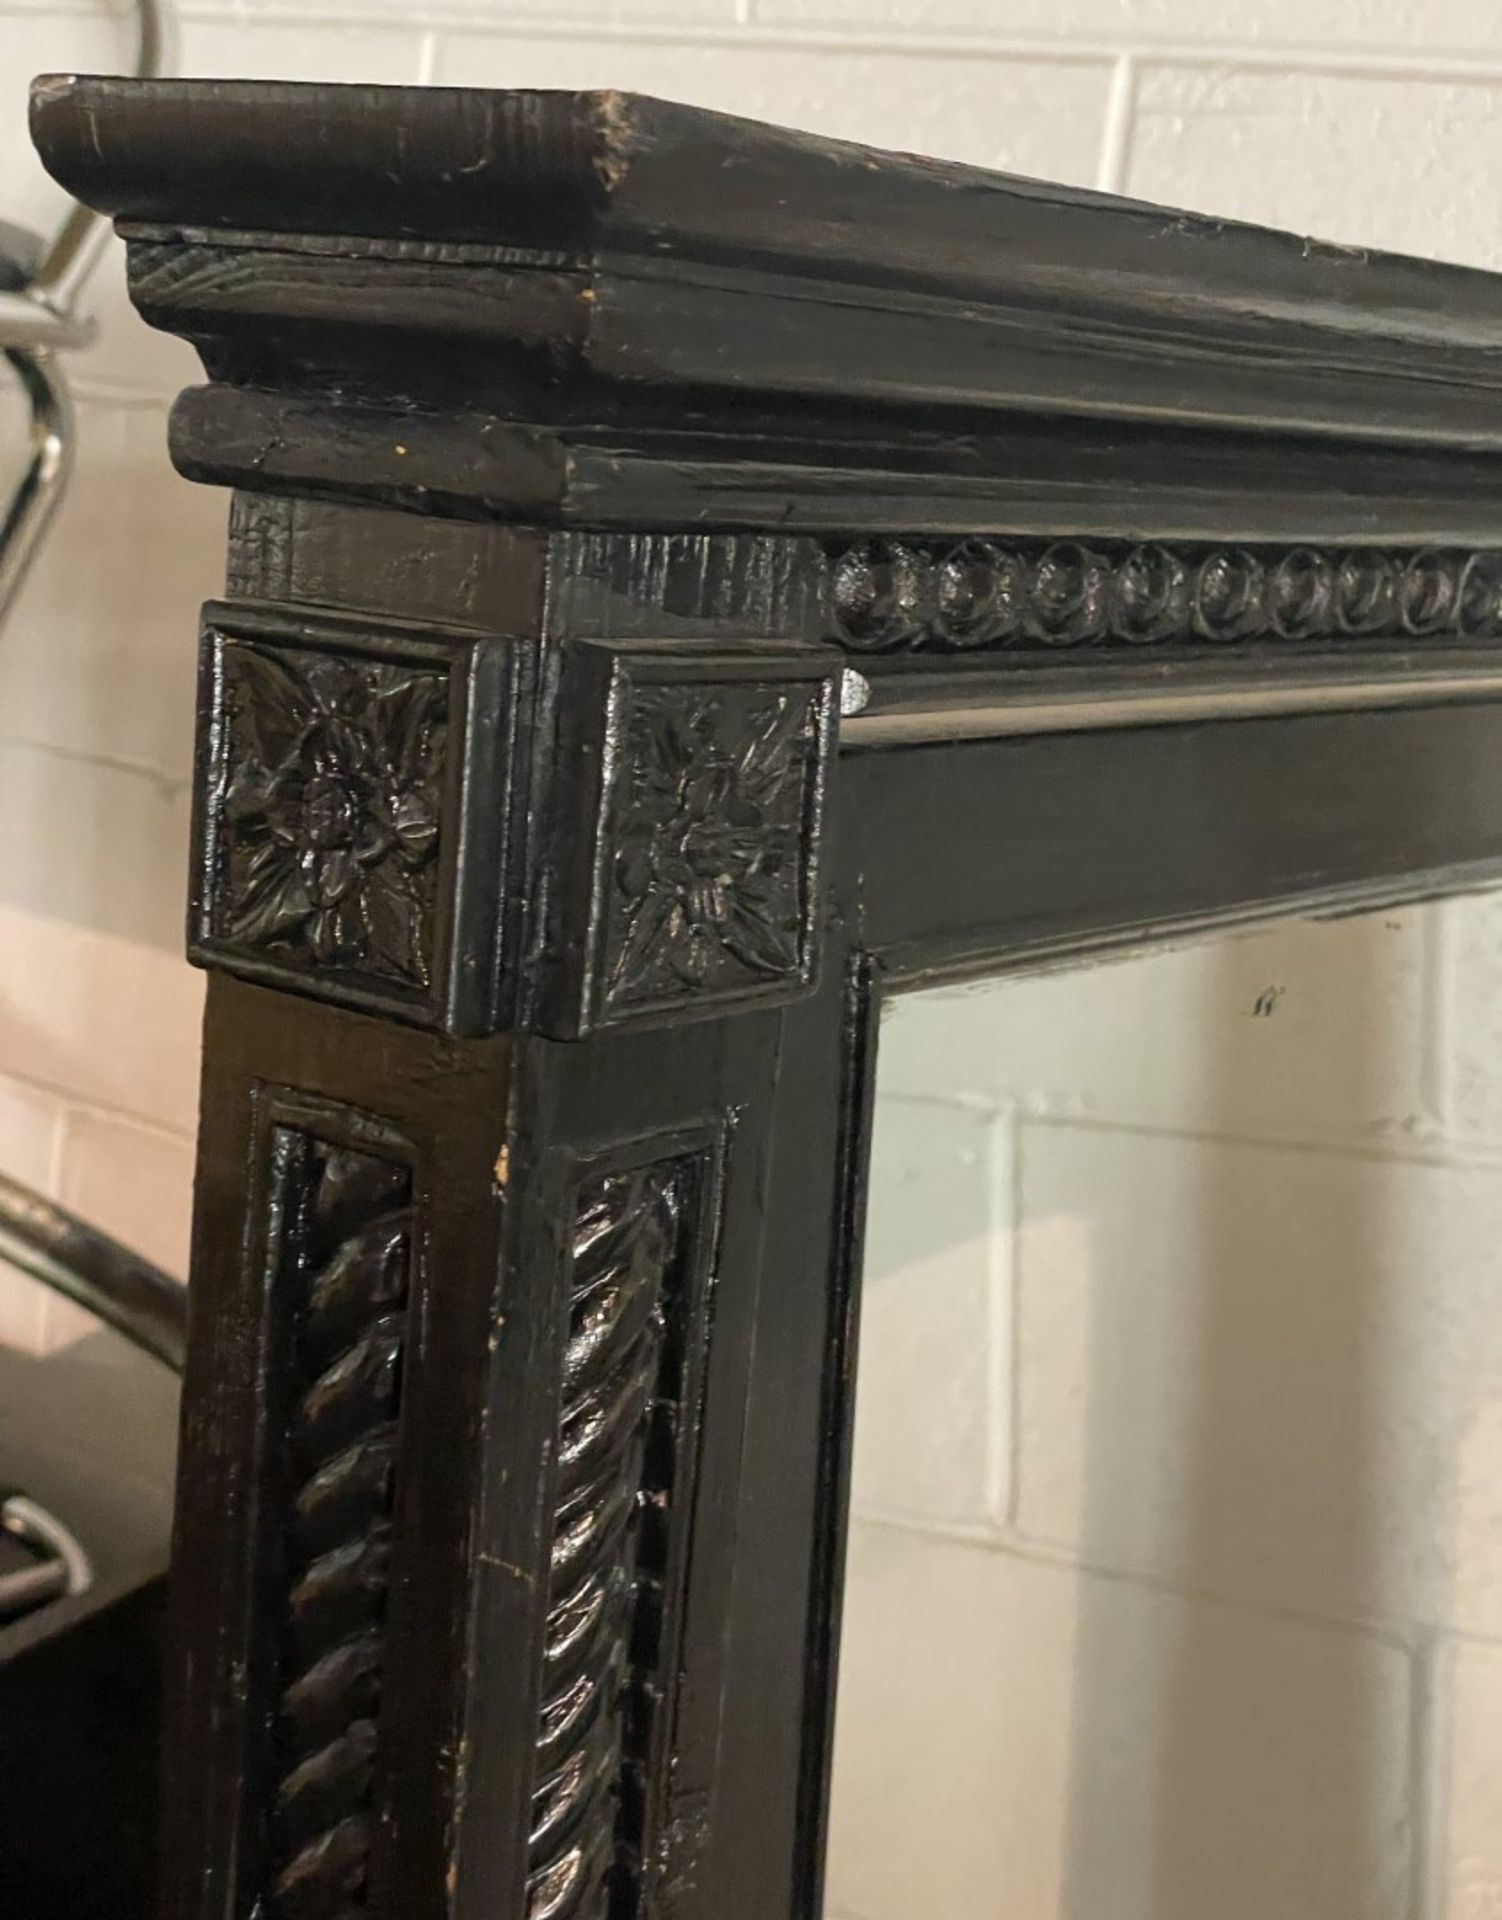 1 x Large Old Jacobean Style Floor Standing Black Mirror With Wonderful Detail - Approx 85x168Cm - - Image 12 of 14